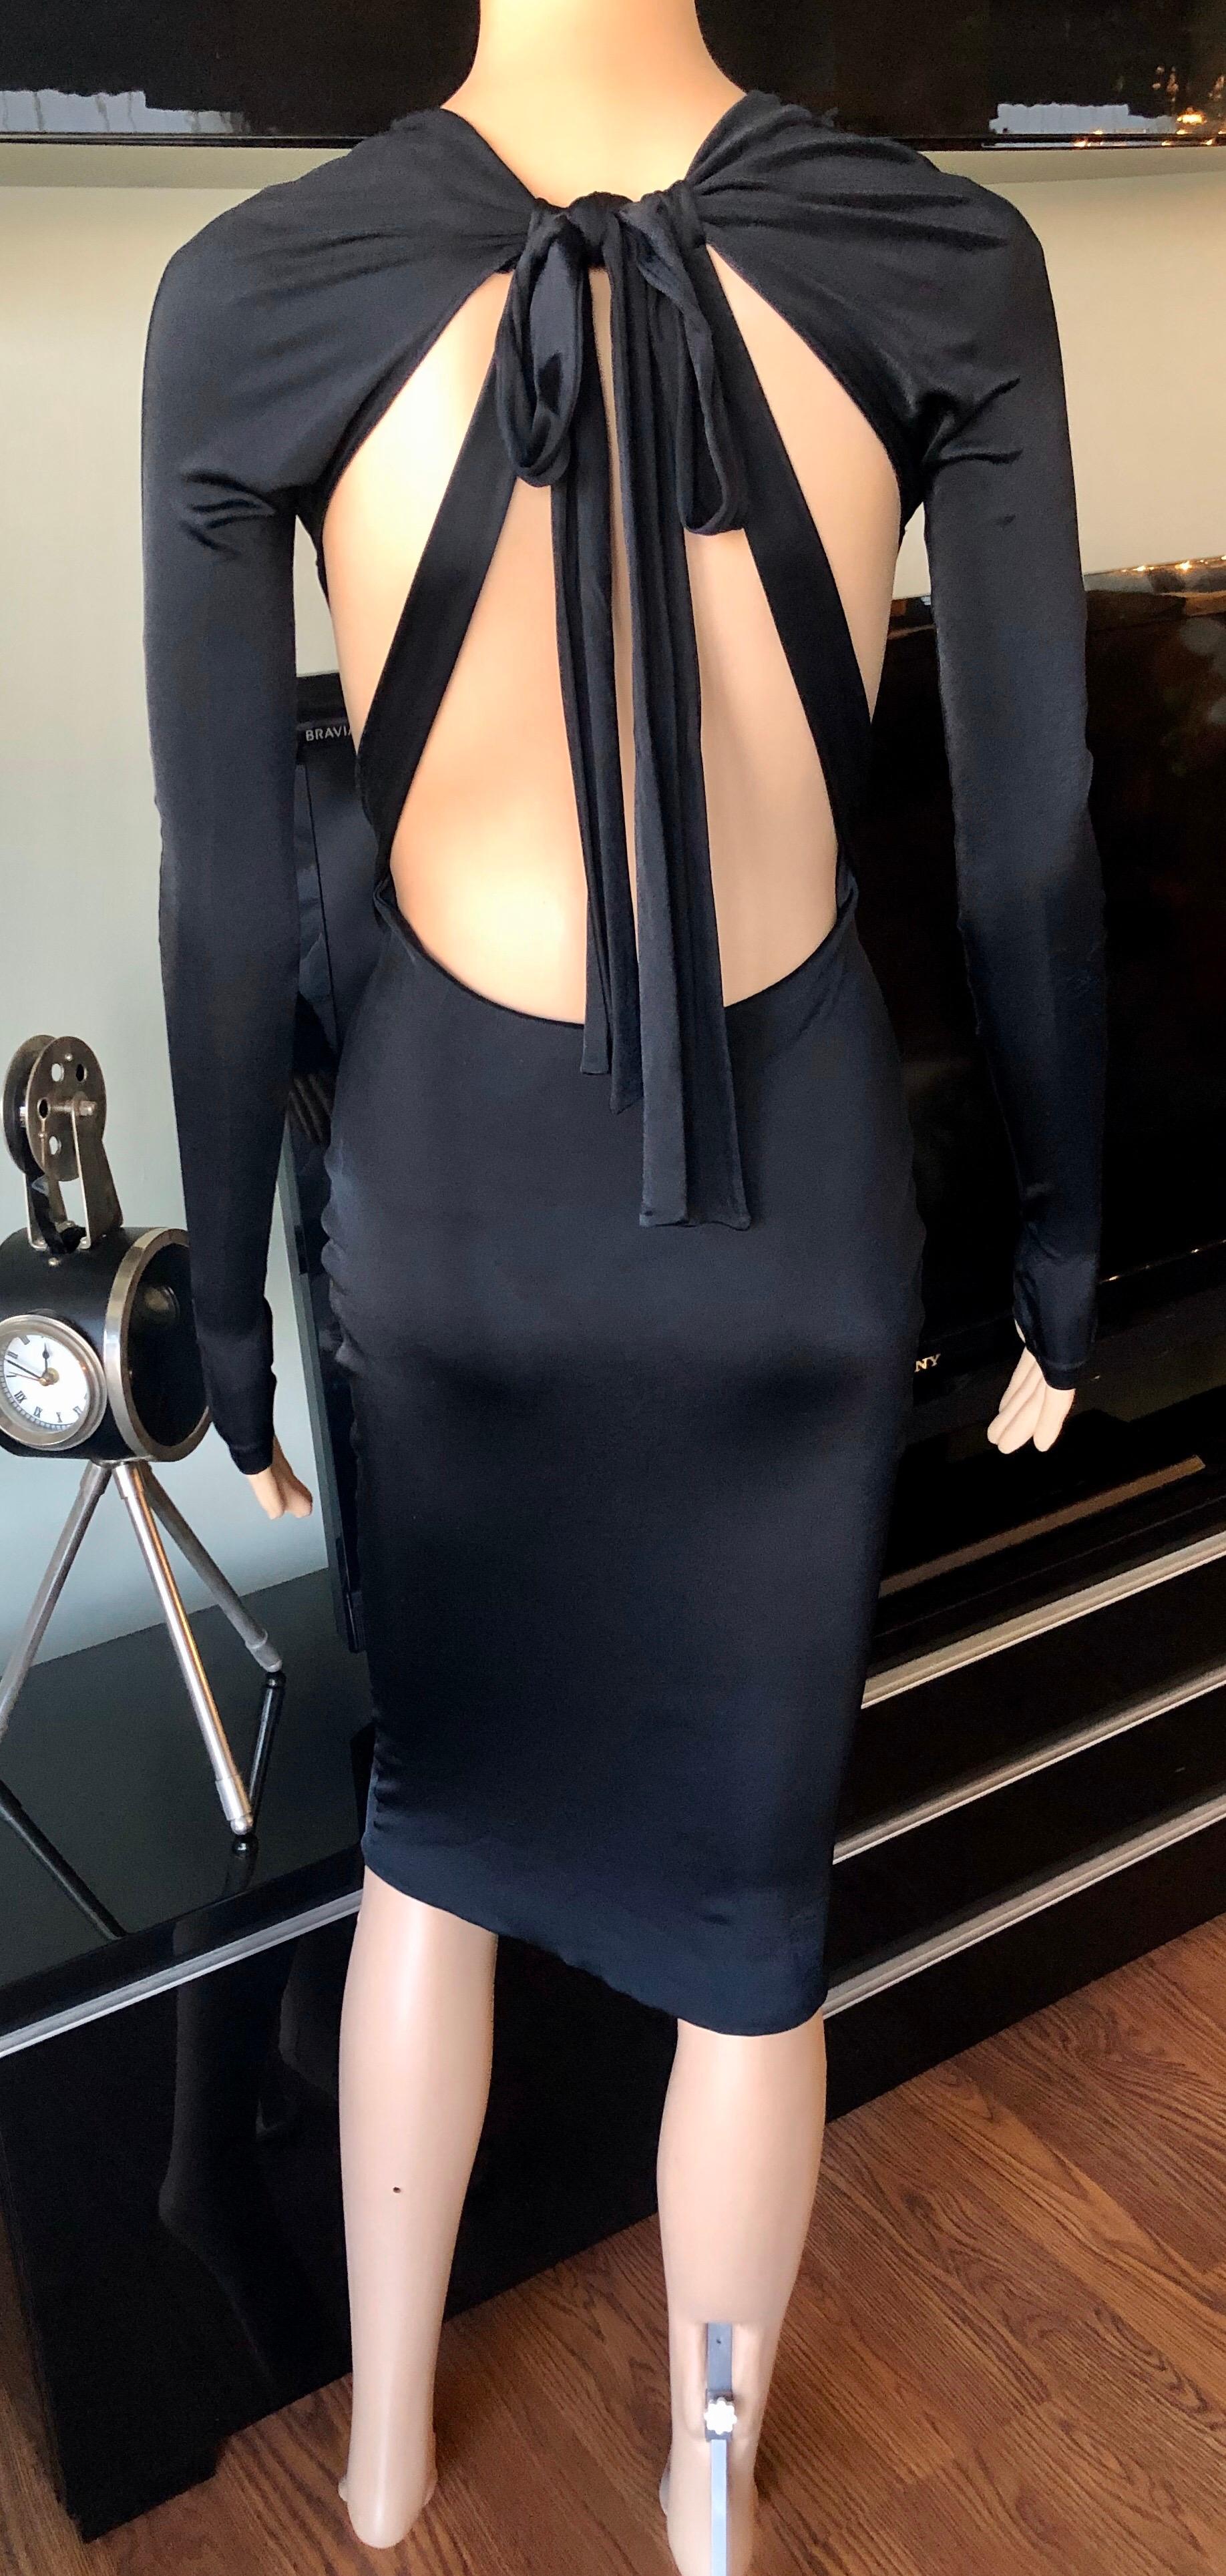 Gucci S/S 2005 Tom Ford Plunging Cutout Backless Bodycon Black Dress en vente 1